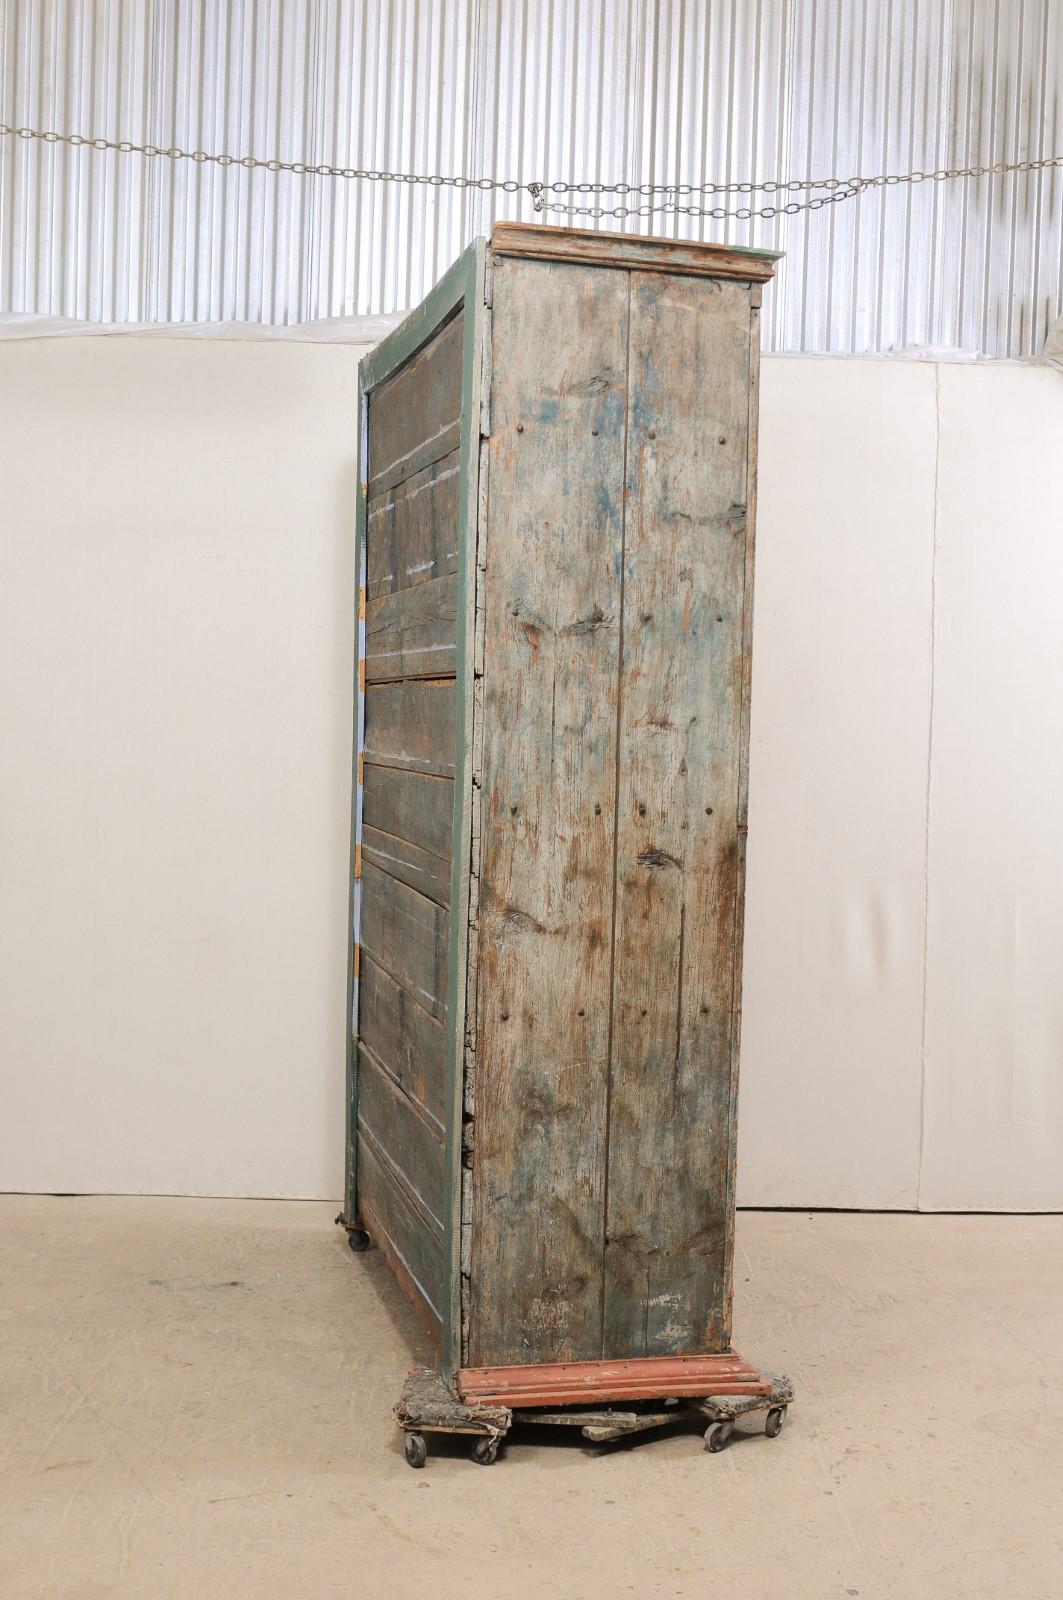 Wood An 8+ Ft. Tall Antique Storage Cabinet from Brazil, with it's Original Paint For Sale